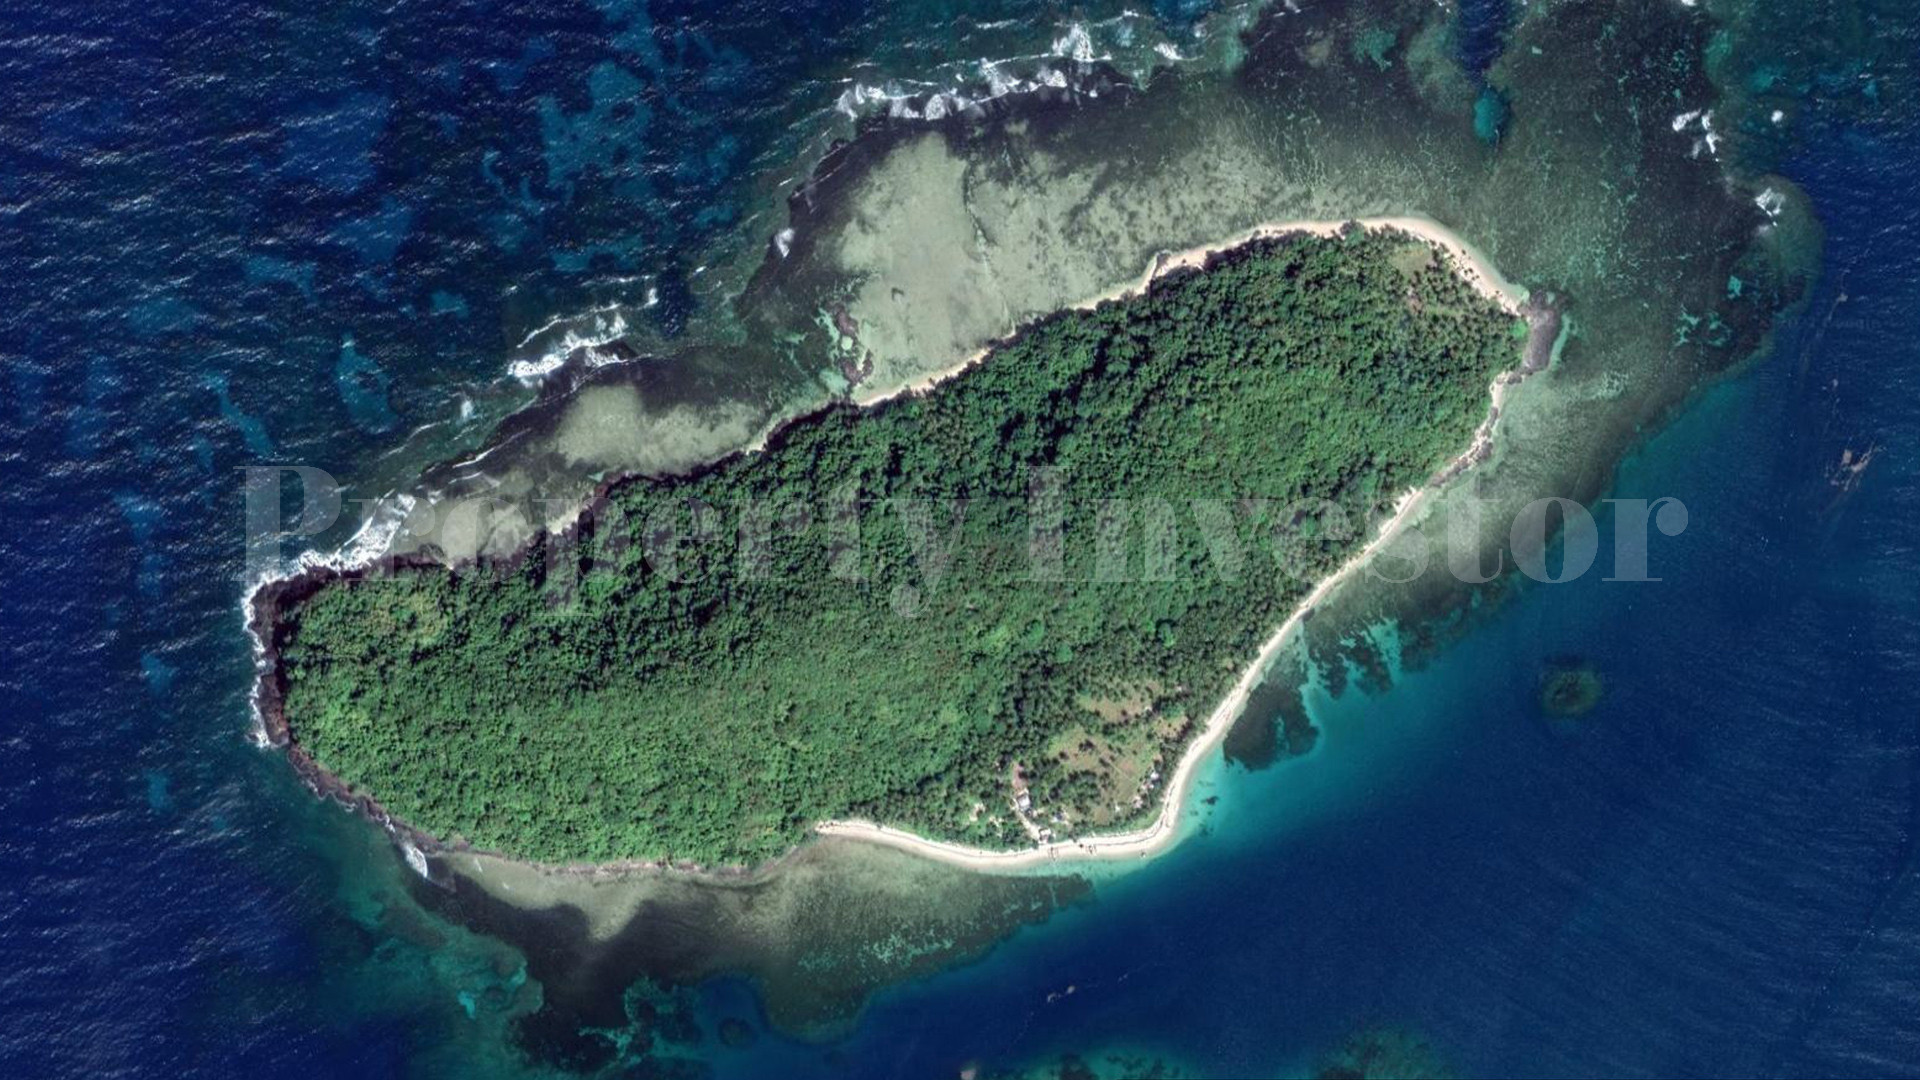 42 Hectare Private Virgin Island for Commercial or Residential Development for Sale in Palawan, the Philippines